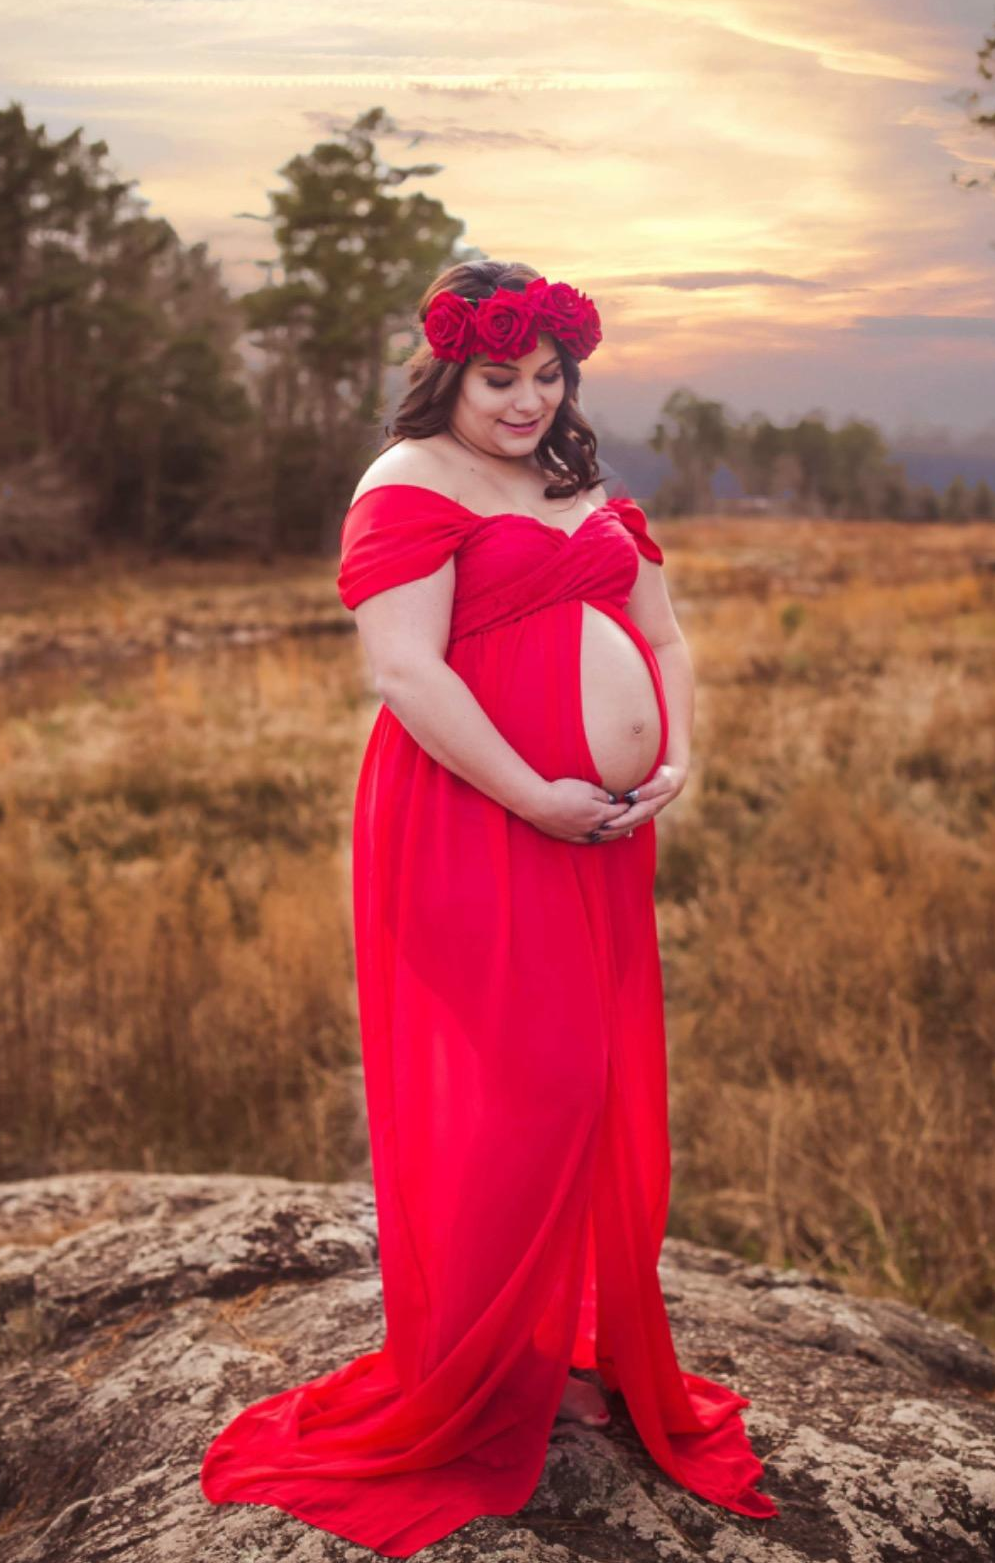 Show Off Your Bump With Our Top 25 Maternity Shoot Outfits!